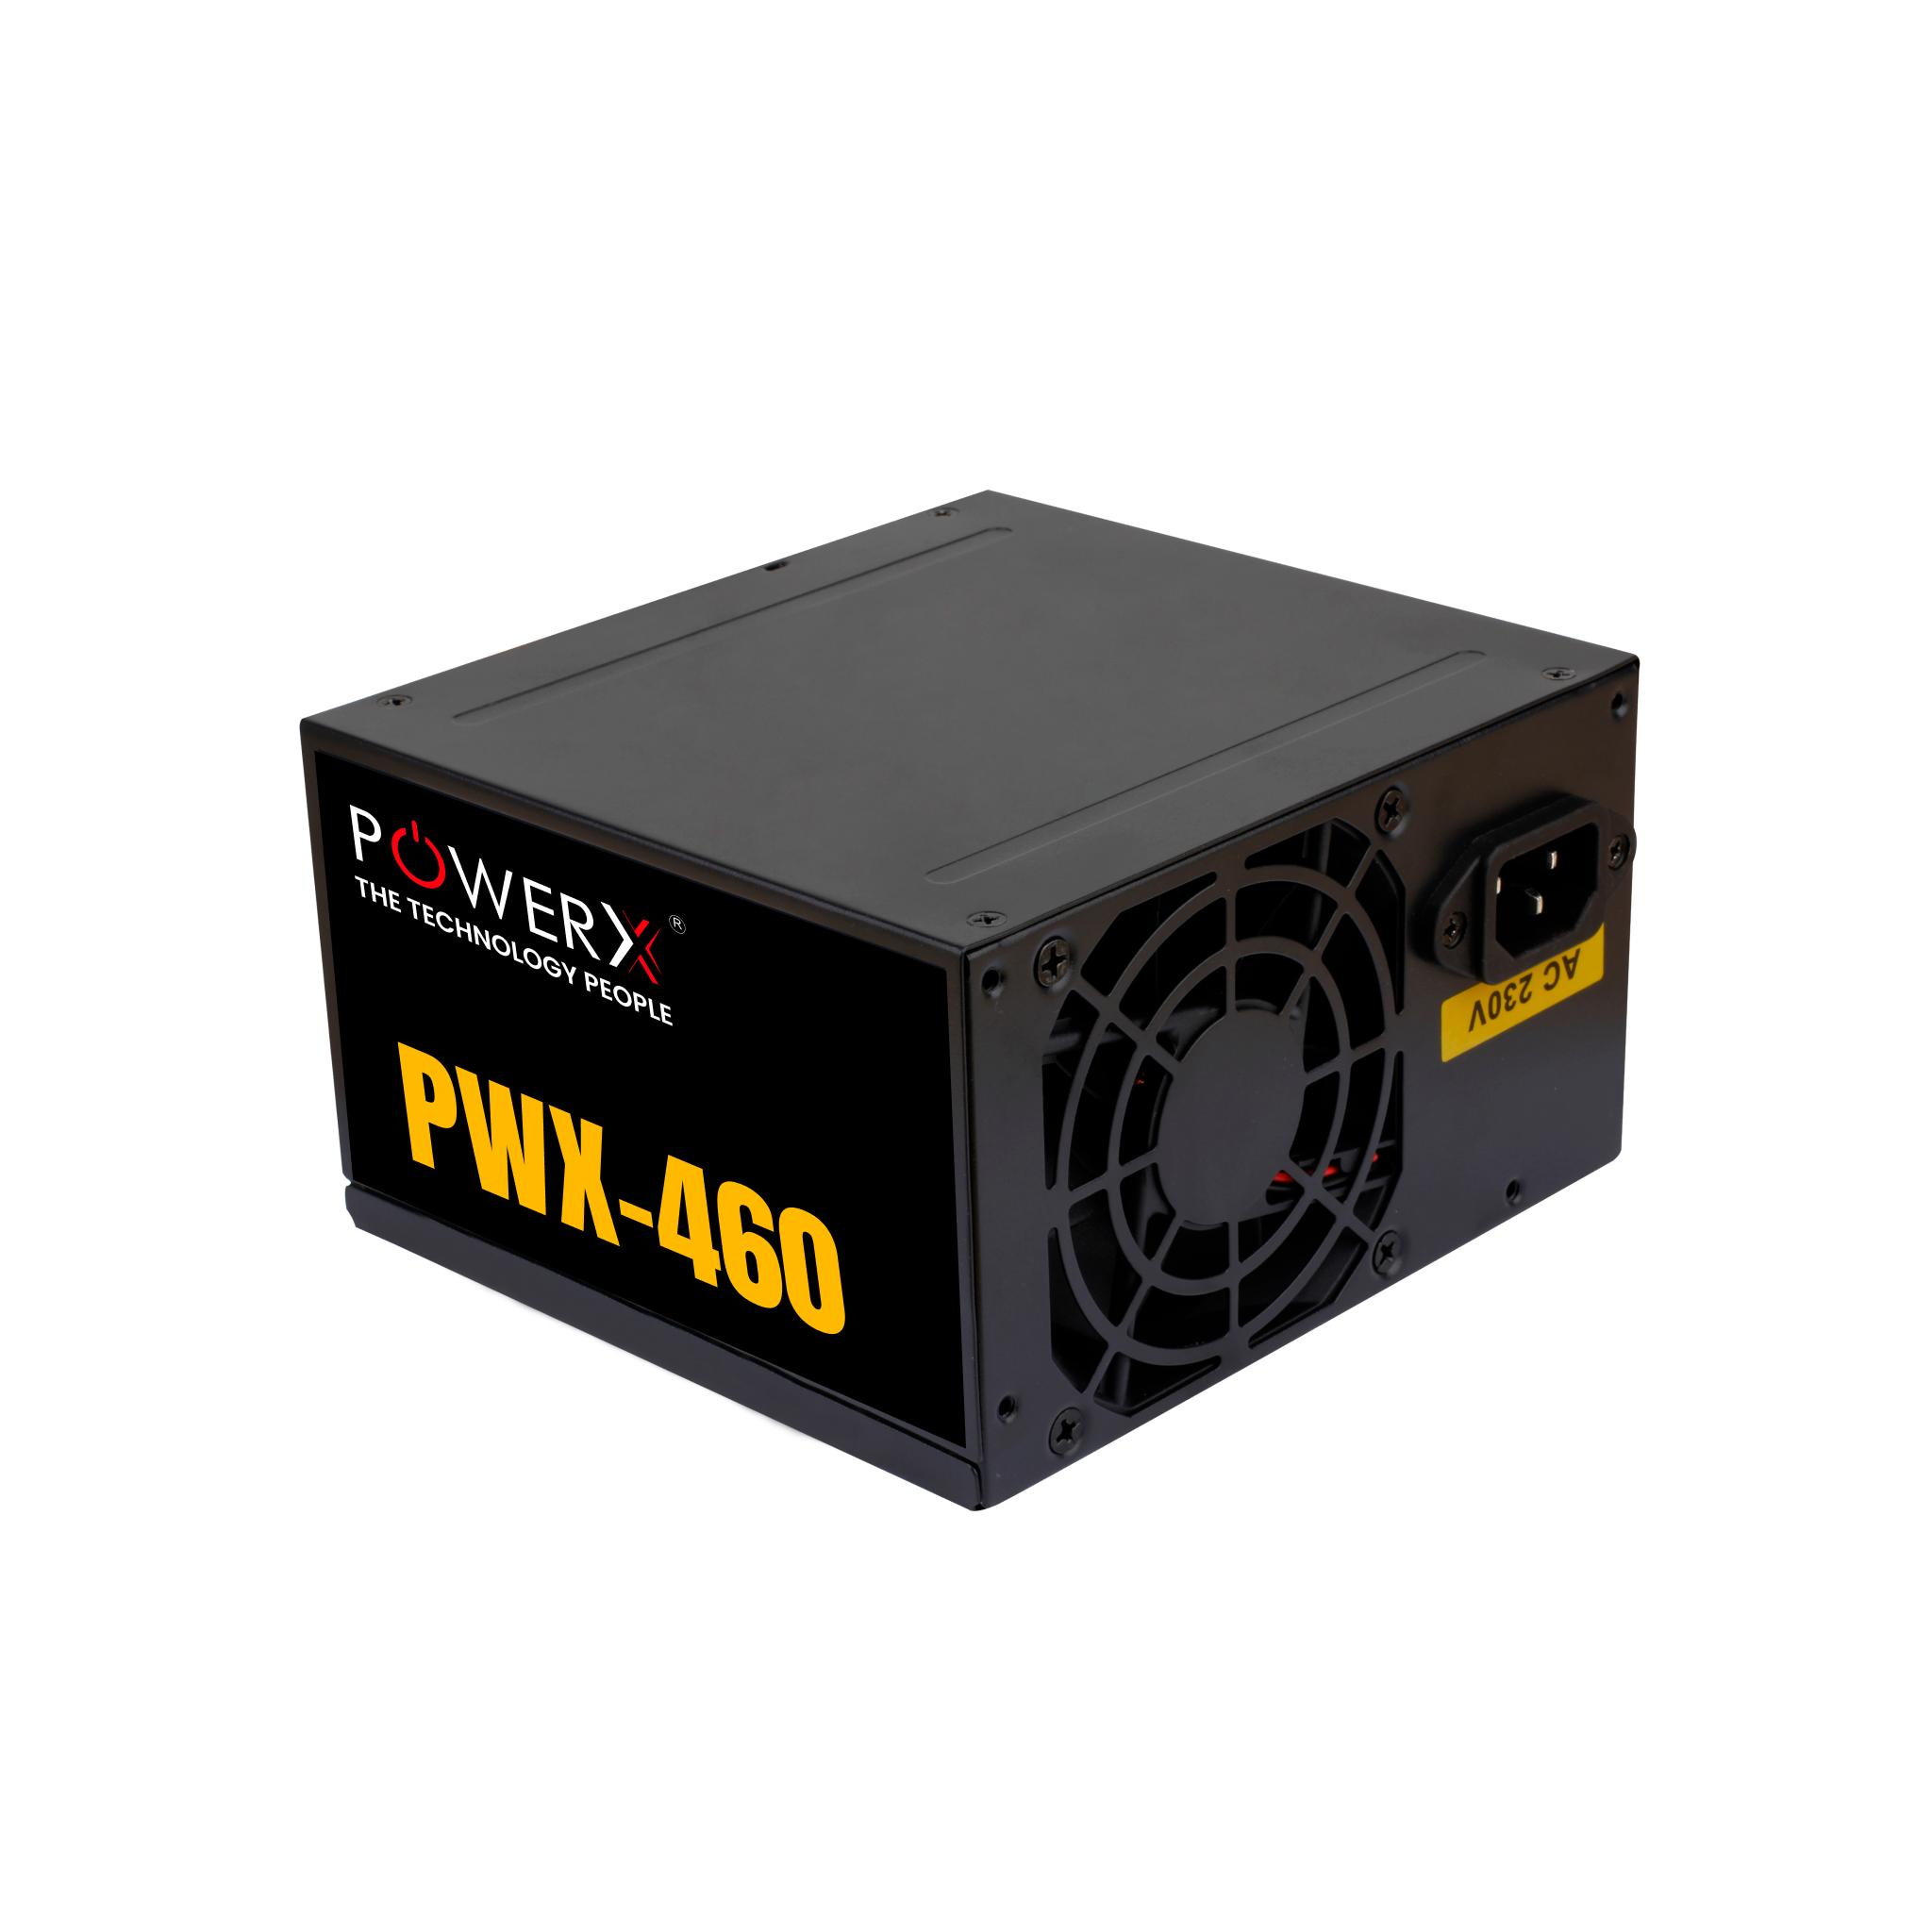 PWX-460 SMD SMPS